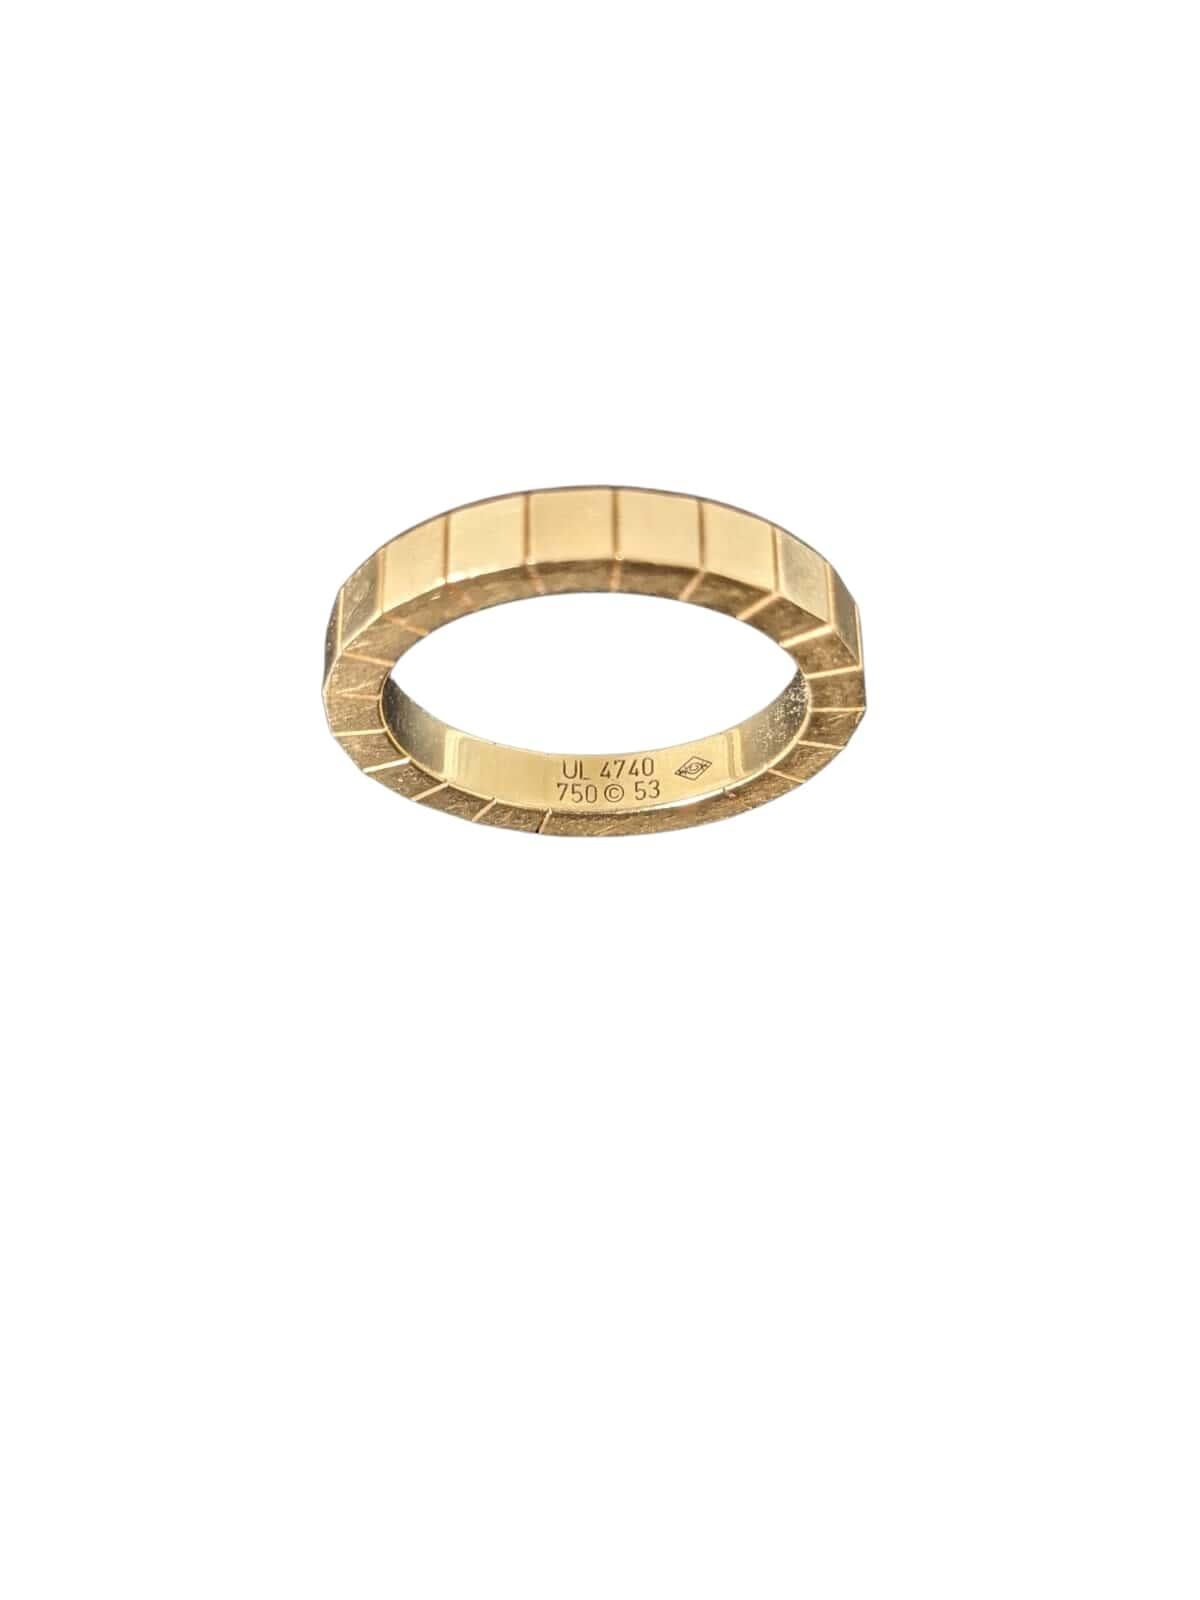 Cartier ring in 18kt yellow gold
Weight 6.30 grams
Measure IT 13 - 53
Misura US 6.25
